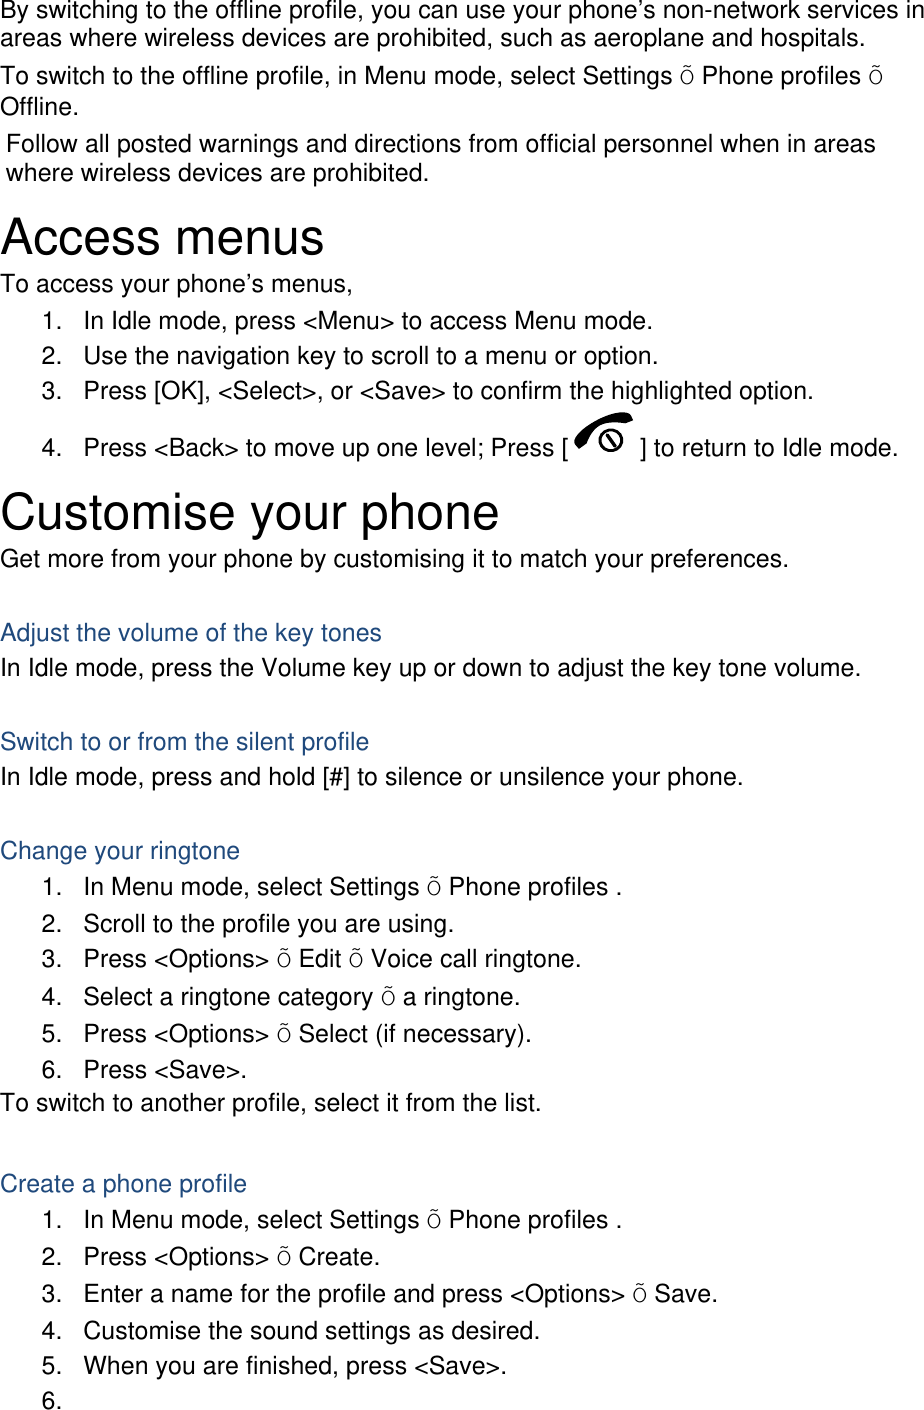 By switching to the offline profile, you can use your phone’s non-network services in areas where wireless devices are prohibited, such as aeroplane and hospitals. To switch to the offline profile, in Menu mode, select Settings Õ Phone profiles Õ Offline. Follow all posted warnings and directions from official personnel when in areas where wireless devices are prohibited. Access menus To access your phone’s menus, 1.  In Idle mode, press &lt;Menu&gt; to access Menu mode. 2.  Use the navigation key to scroll to a menu or option. 3.  Press [OK], &lt;Select&gt;, or &lt;Save&gt; to confirm the highlighted option. 4.  Press &lt;Back&gt; to move up one level; Press [ ] to return to Idle mode. Customise your phone Get more from your phone by customising it to match your preferences.  Adjust the volume of the key tones In Idle mode, press the Volume key up or down to adjust the key tone volume.  Switch to or from the silent profile In Idle mode, press and hold [#] to silence or unsilence your phone.  Change your ringtone 1.  In Menu mode, select Settings Õ Phone profiles . 2.  Scroll to the profile you are using. 3. Press &lt;Options&gt; Õ Edit Õ Voice call ringtone. 4.  Select a ringtone category Õ a ringtone. 5. Press &lt;Options&gt; Õ Select (if necessary). 6. Press &lt;Save&gt;. To switch to another profile, select it from the list.  Create a phone profile 1.  In Menu mode, select Settings Õ Phone profiles . 2. Press &lt;Options&gt; Õ Create. 3.  Enter a name for the profile and press &lt;Options&gt; Õ Save. 4.  Customise the sound settings as desired. 5.  When you are finished, press &lt;Save&gt;. 6.  